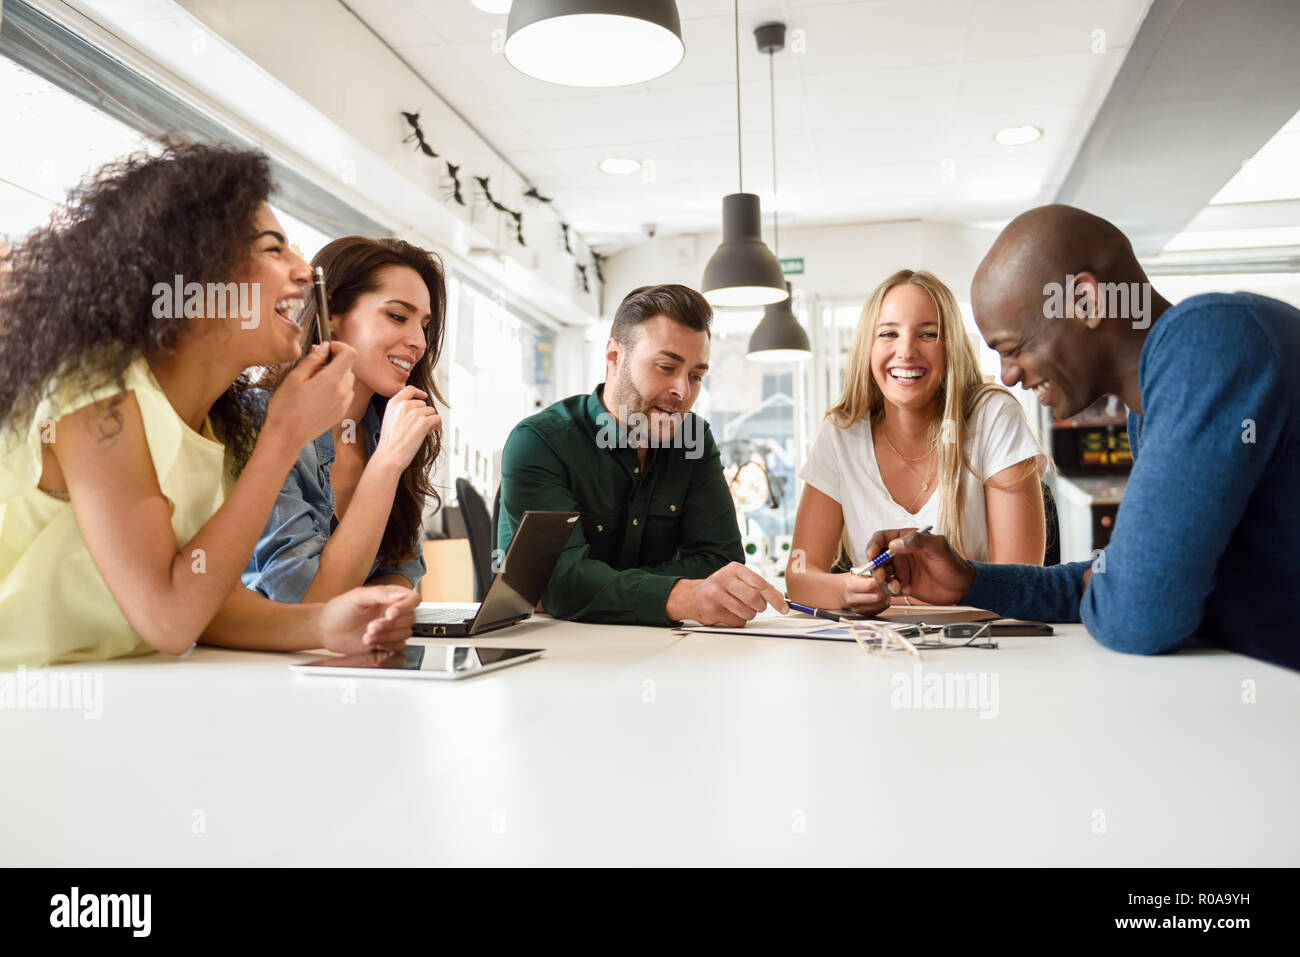 Five young people studying with laptop and tablet computers on white desk. Beautiful girls and guys working toghether wearing casual clothes. Multi-et Stock Photo